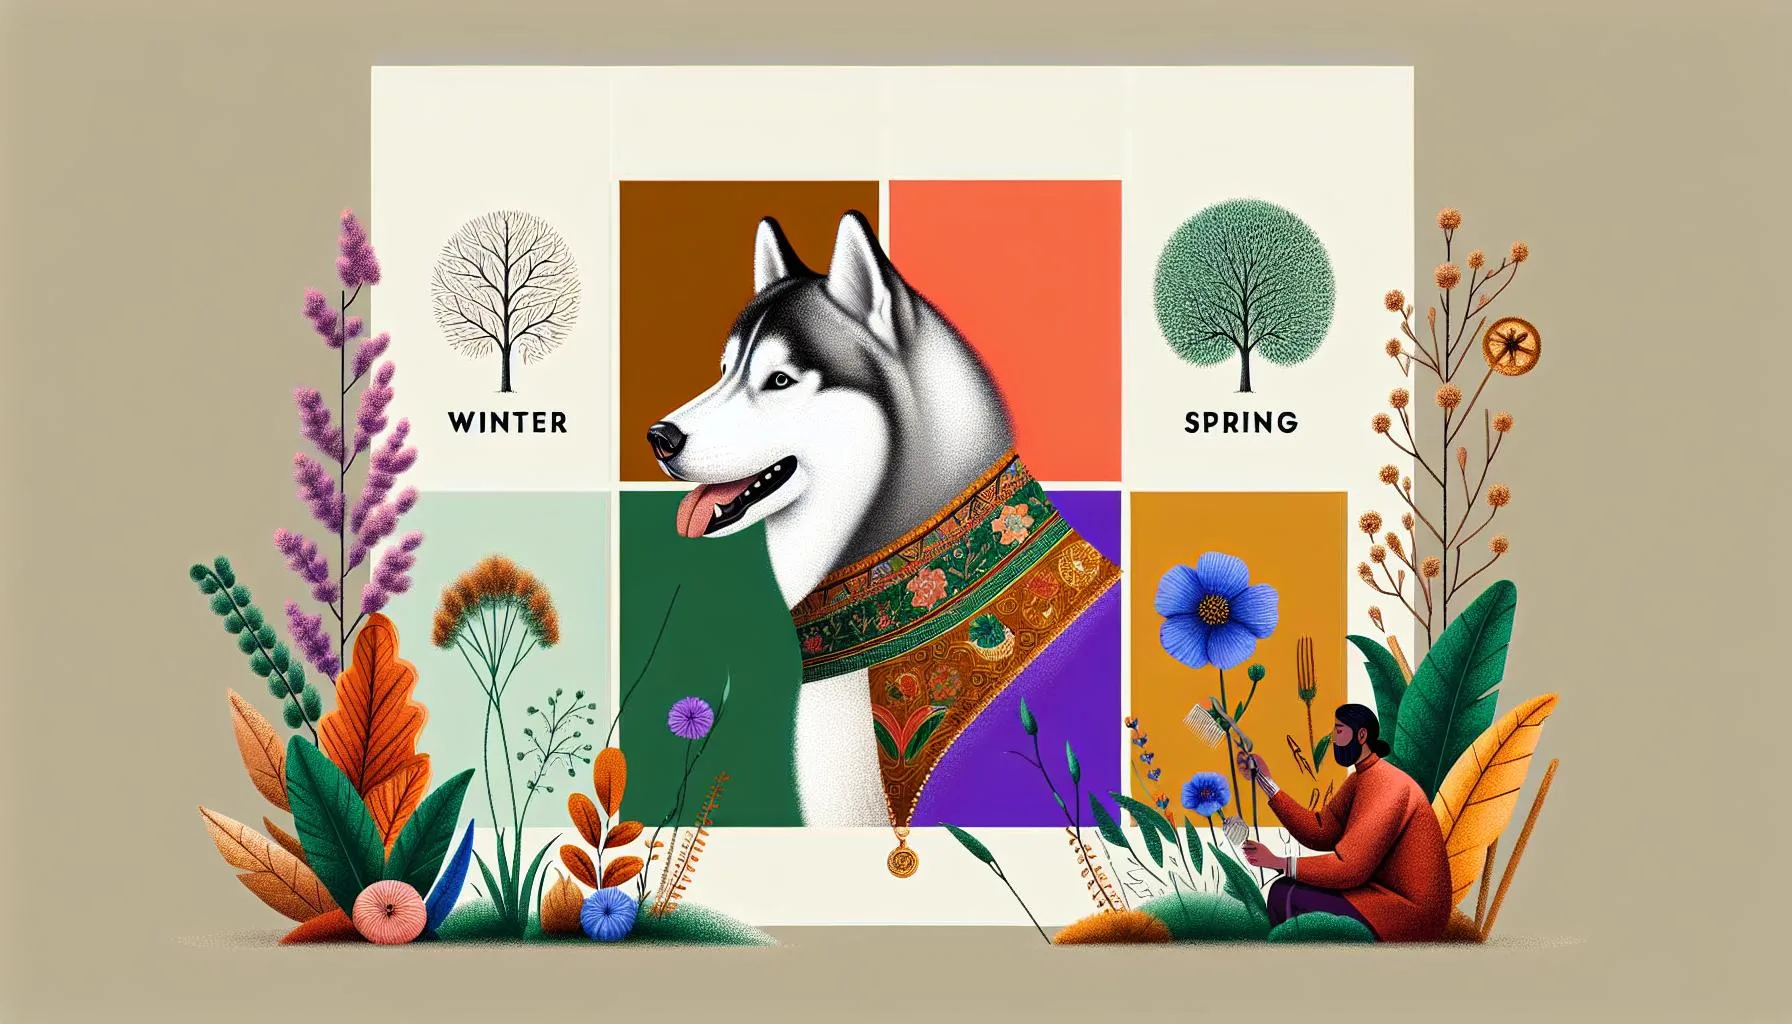 What months do huskies shed Shedding Seasons for Huskies